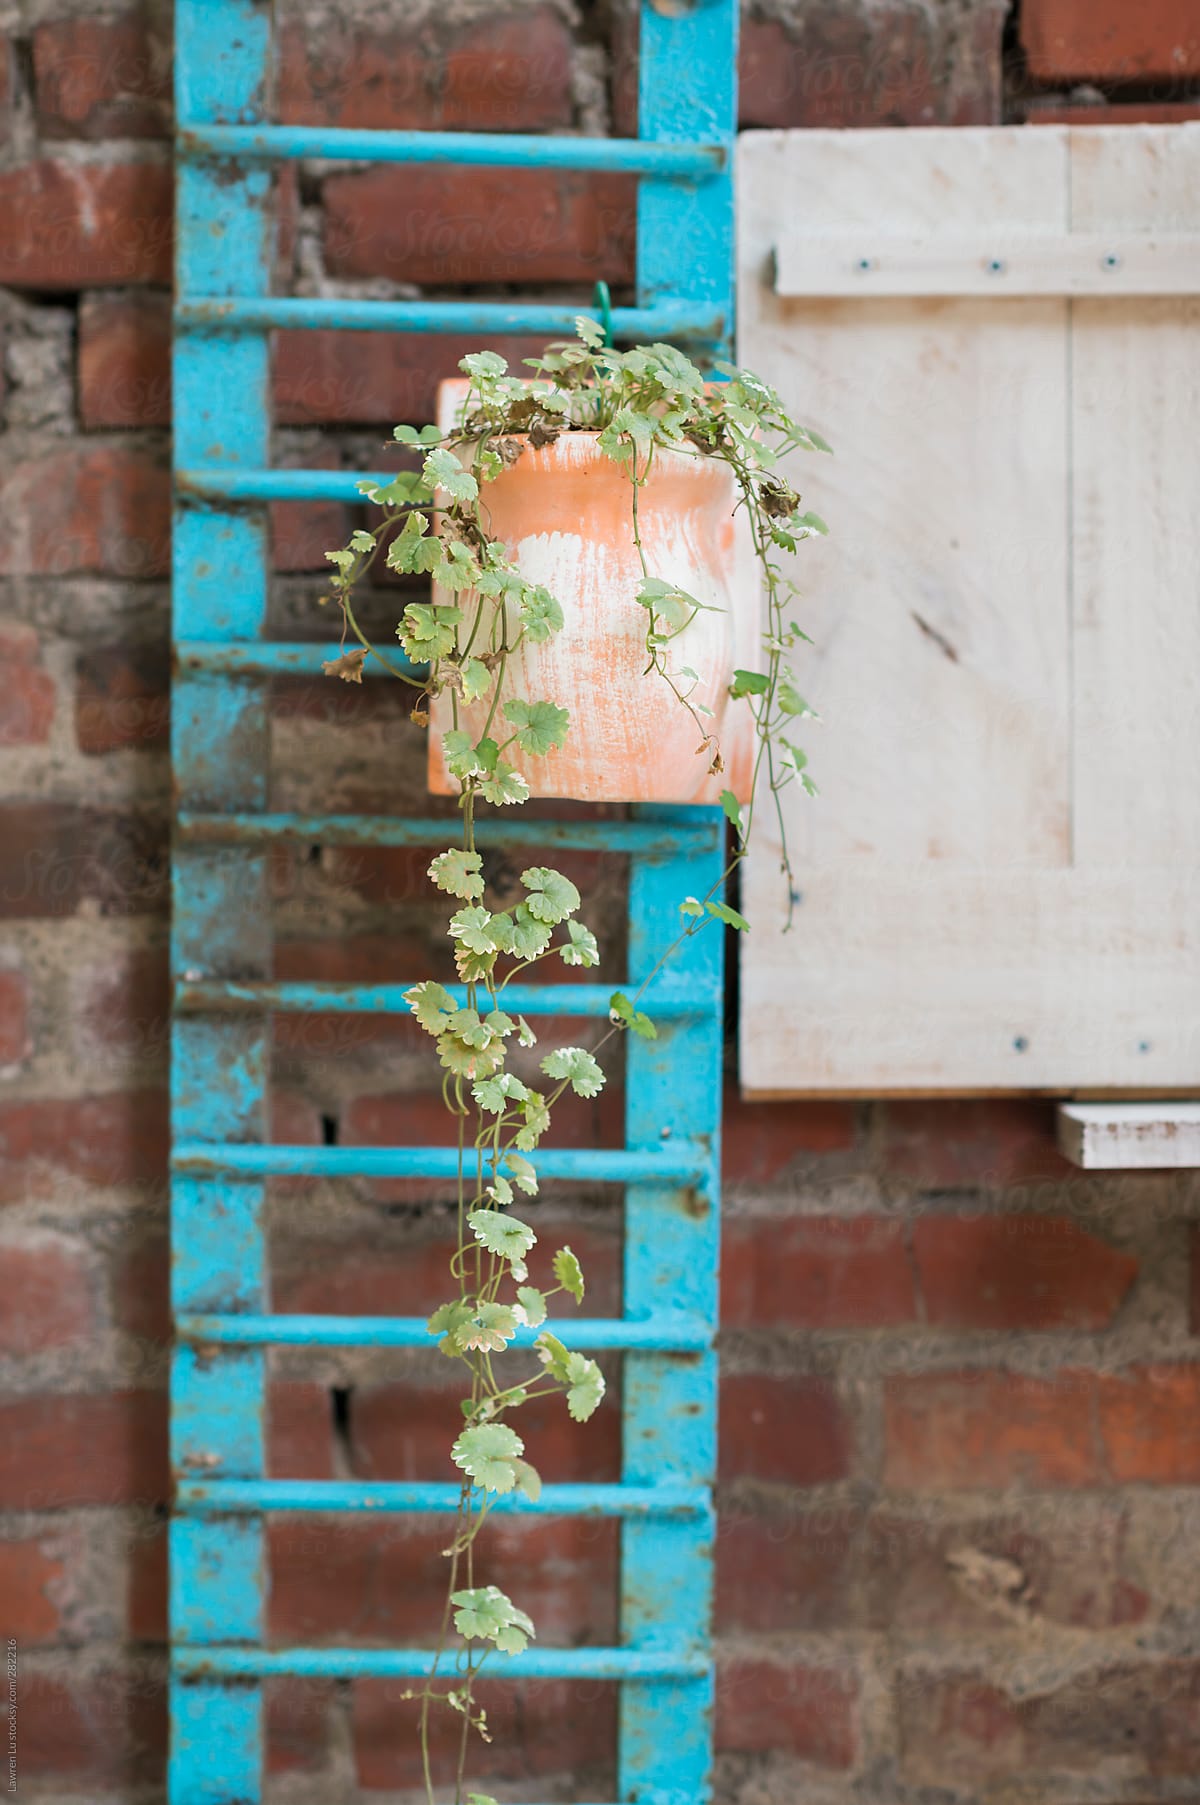 A potted plant hanging on blue vertical stairs in front of brick wall